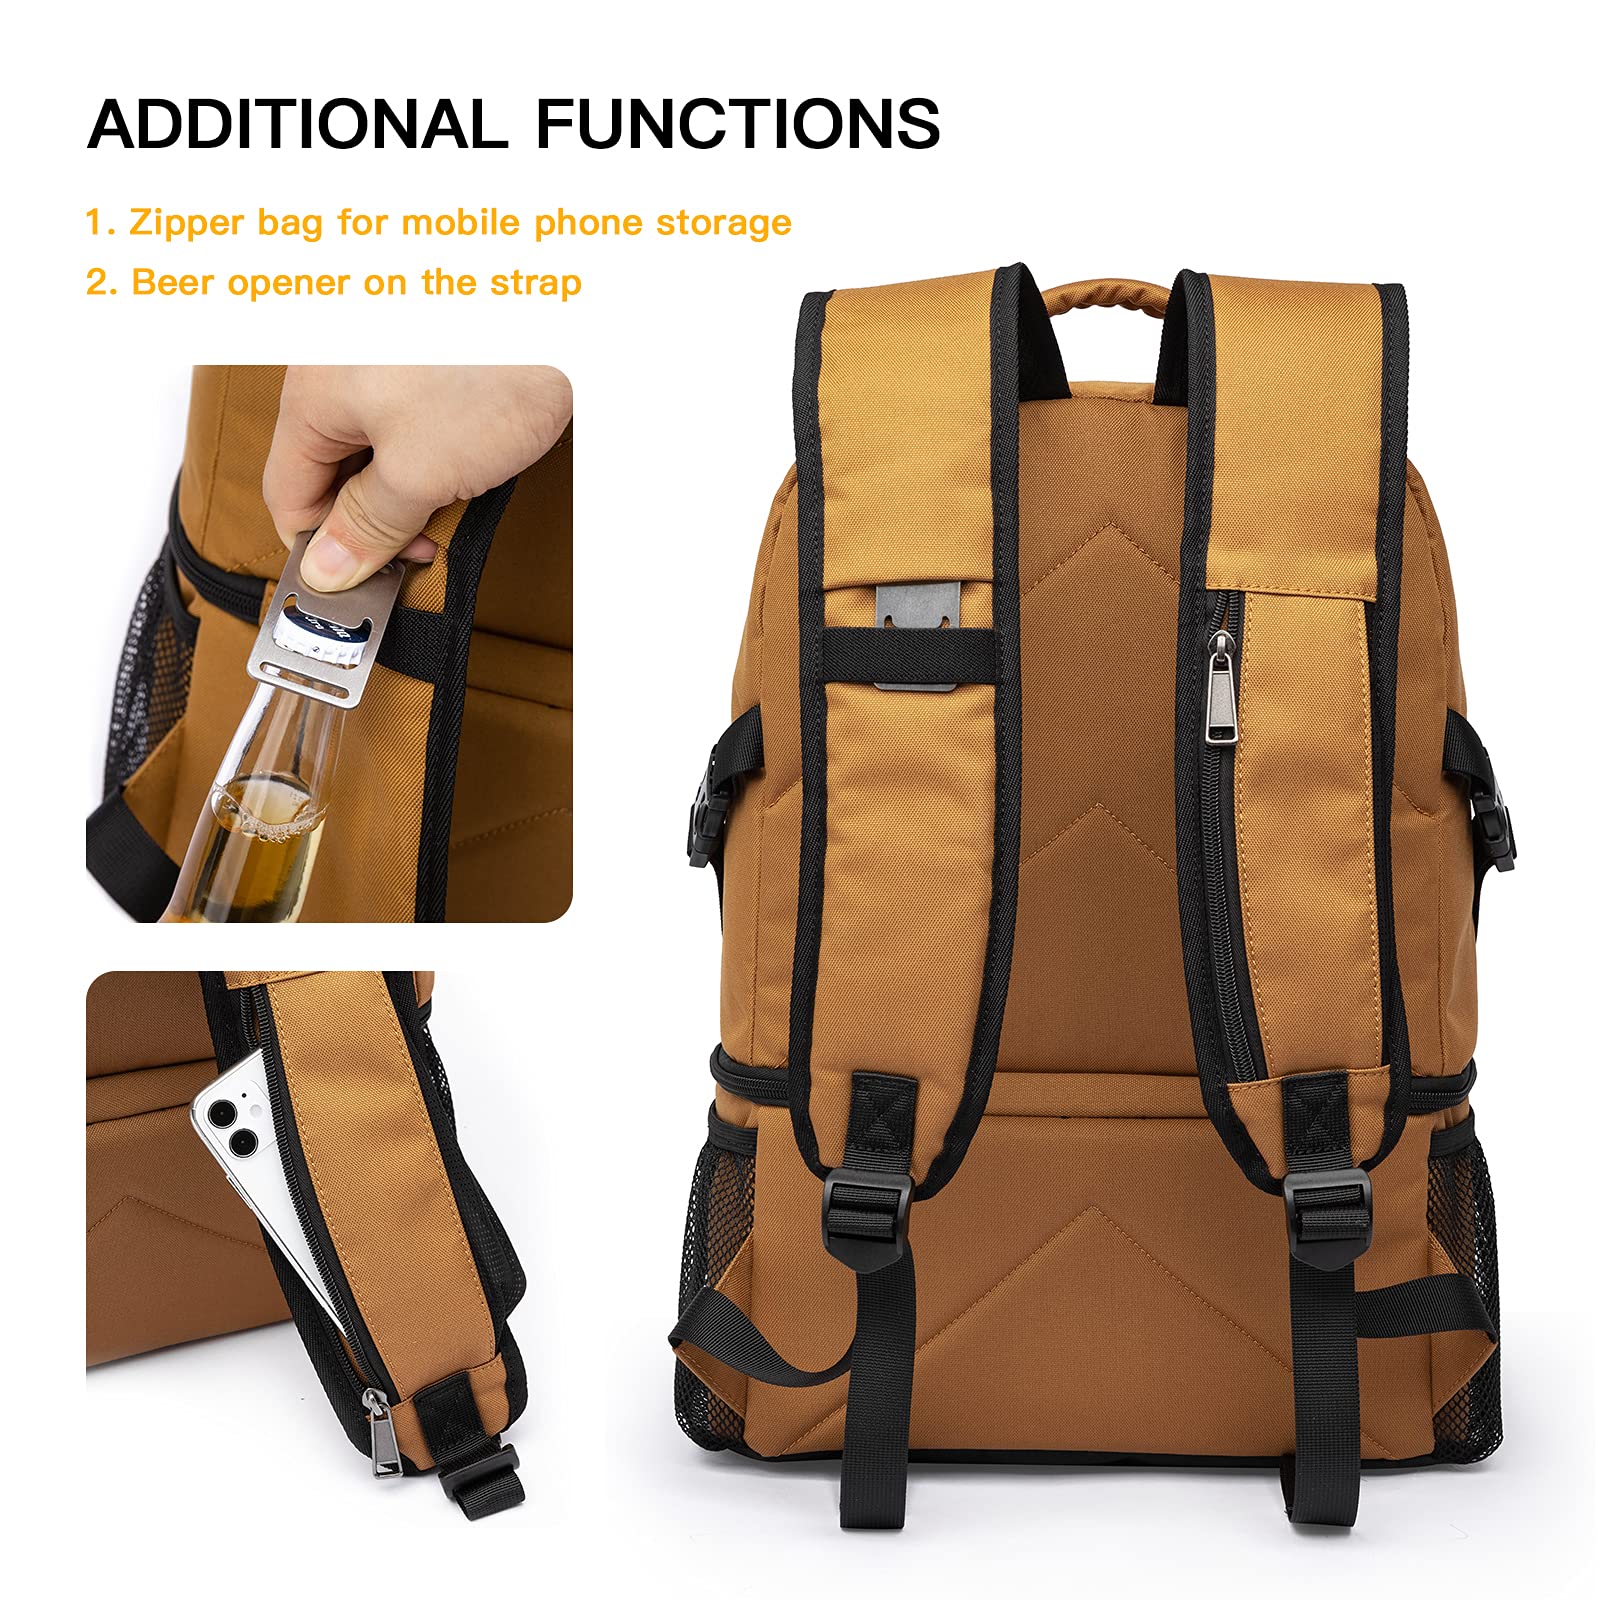 TUGUAN Insulated Cooler Backpack 38/42 Cans Double Deck Leakproof Lightweight Soft Lunch Backpack Small Cooler Bag Beach Picnic, Brown